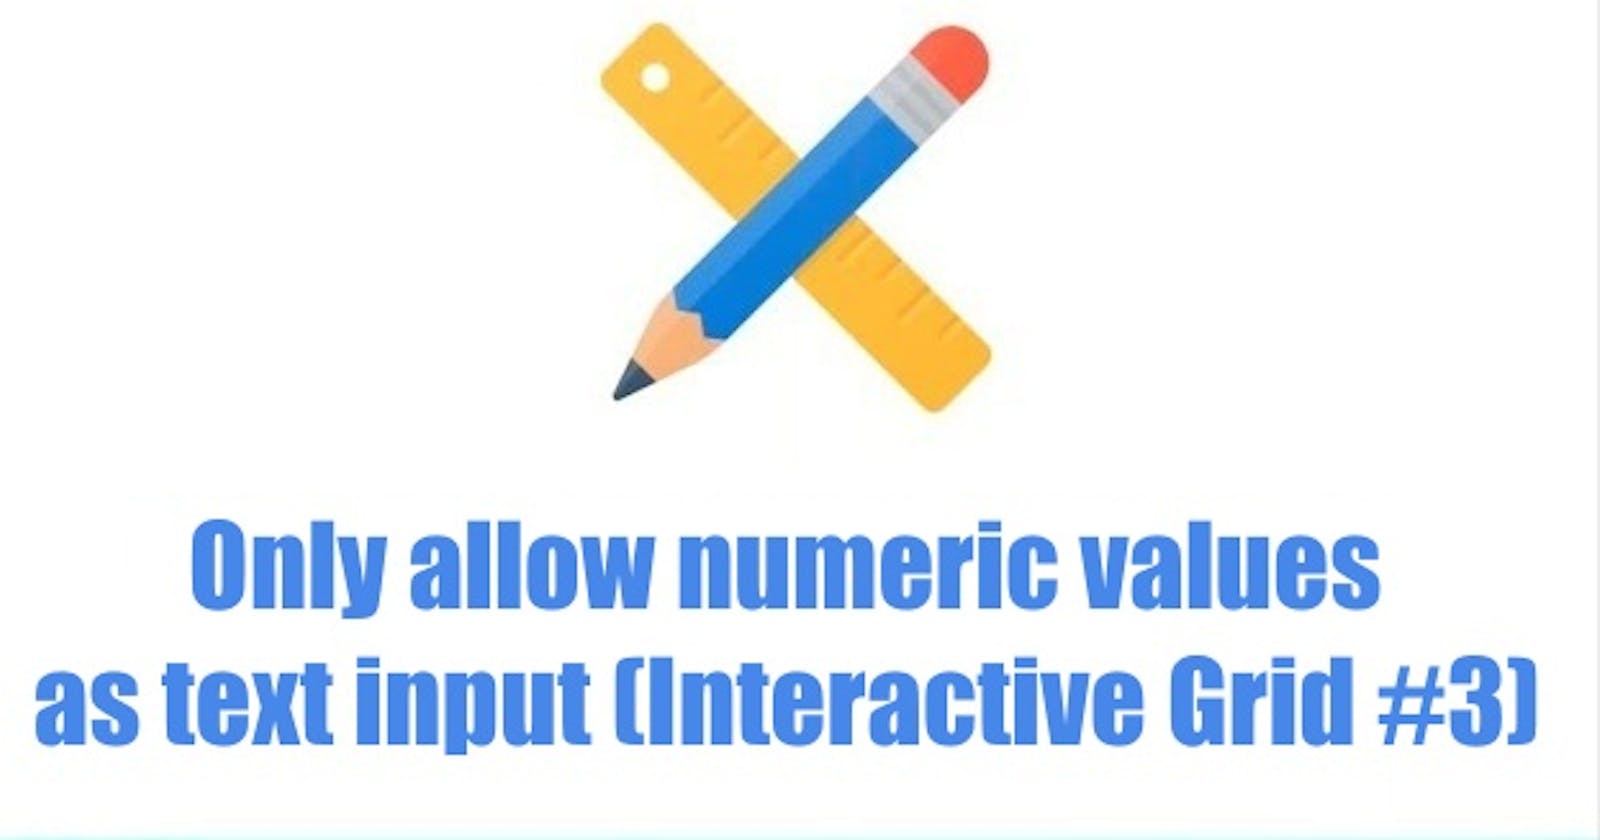 Only allow numeric values as text input (Interactive Grid #3)